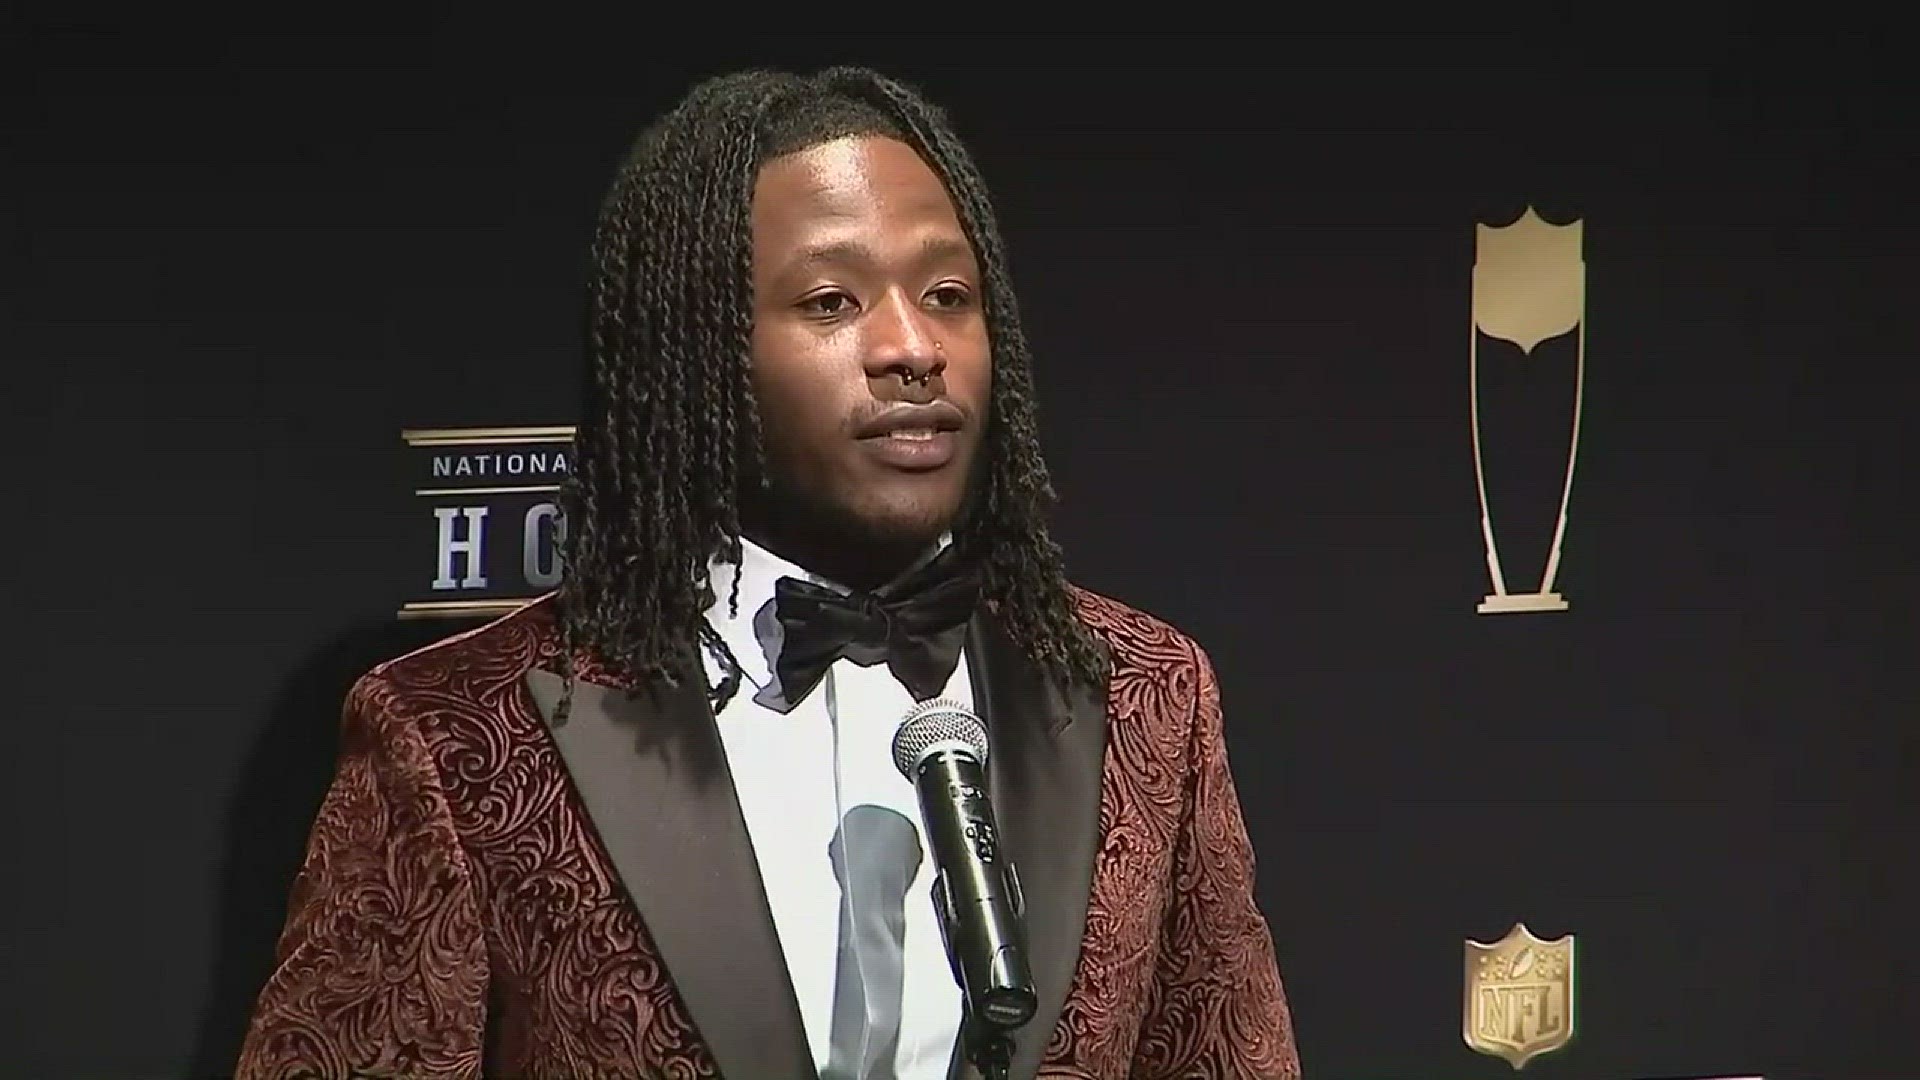 Former Vol Alvin Kamara was named NFL Offensive Rookie of the Year on Saturday and commented on his lack of touches at Tennessee.